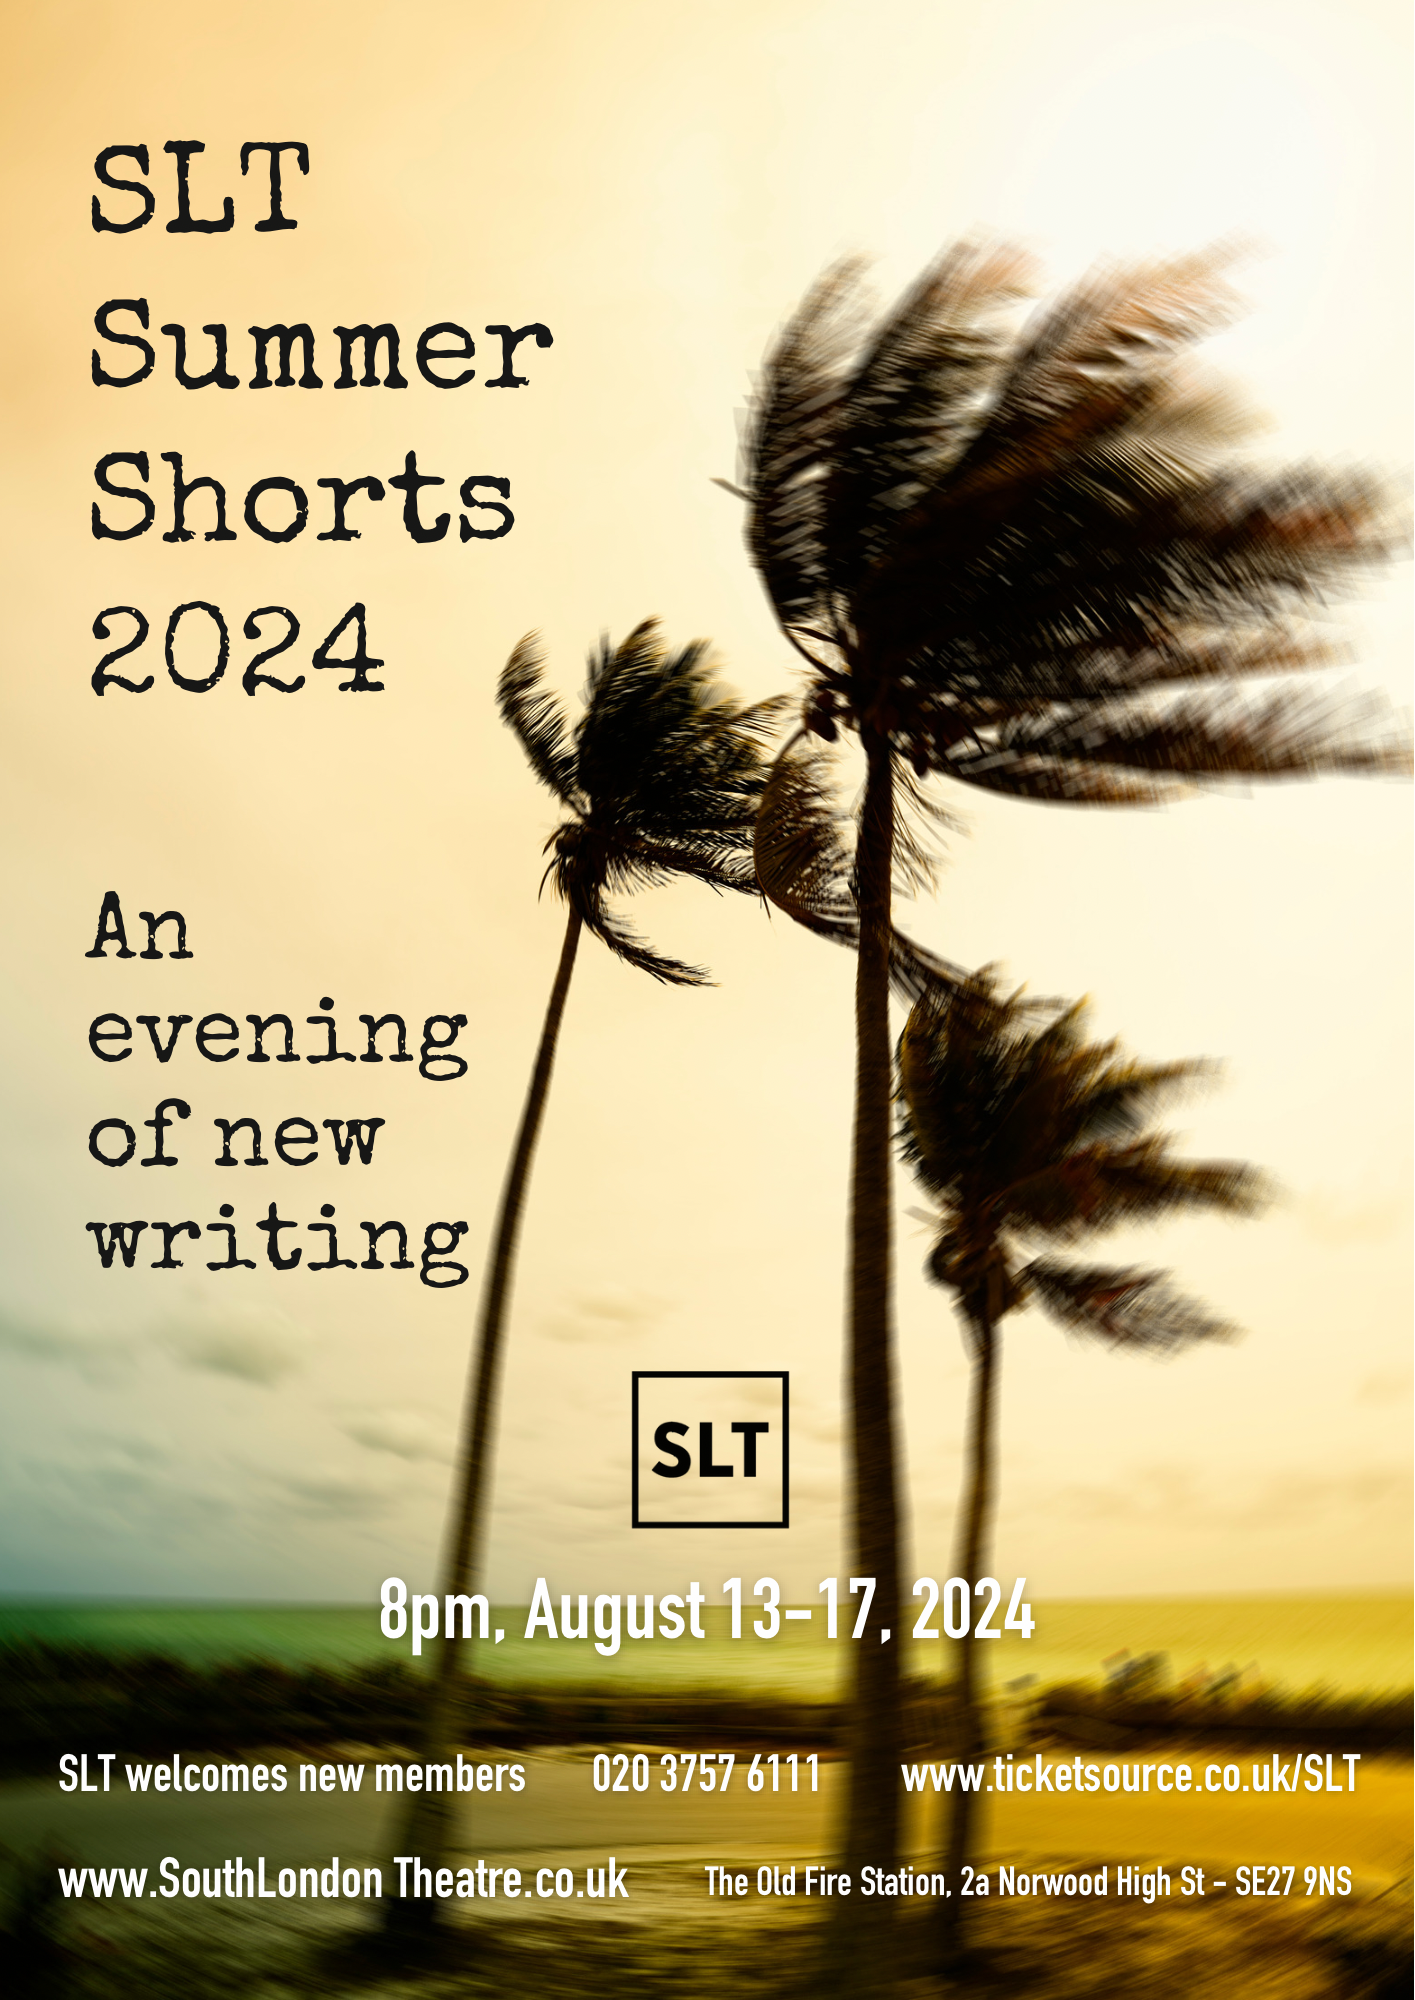 SLT Summer Shorts 2024 poster image of palm trees blowing in strong wind against a pale yellow sky.